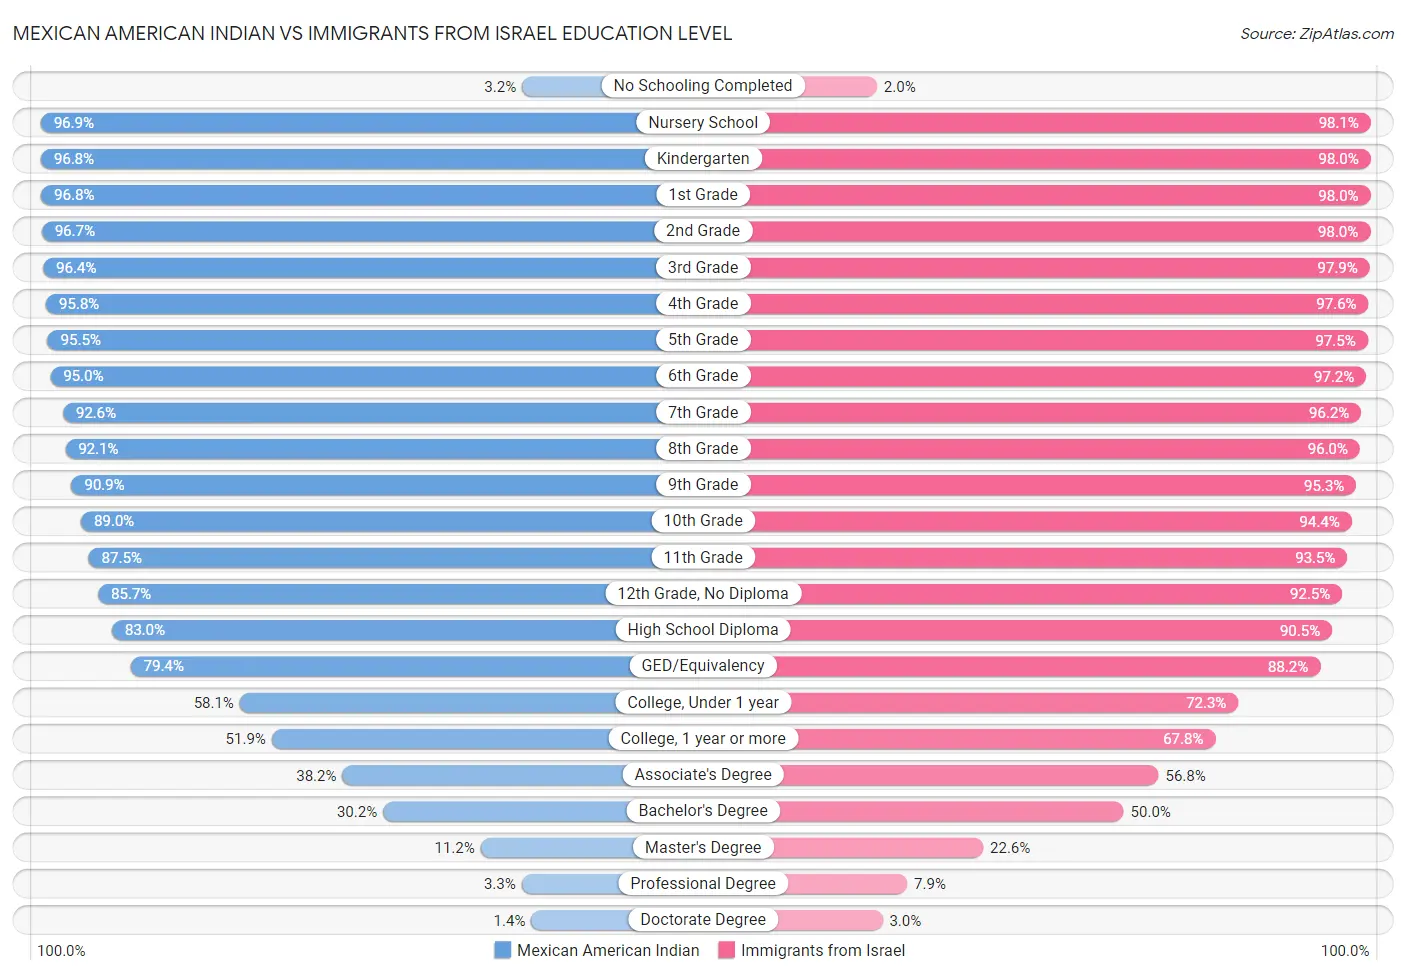 Mexican American Indian vs Immigrants from Israel Education Level